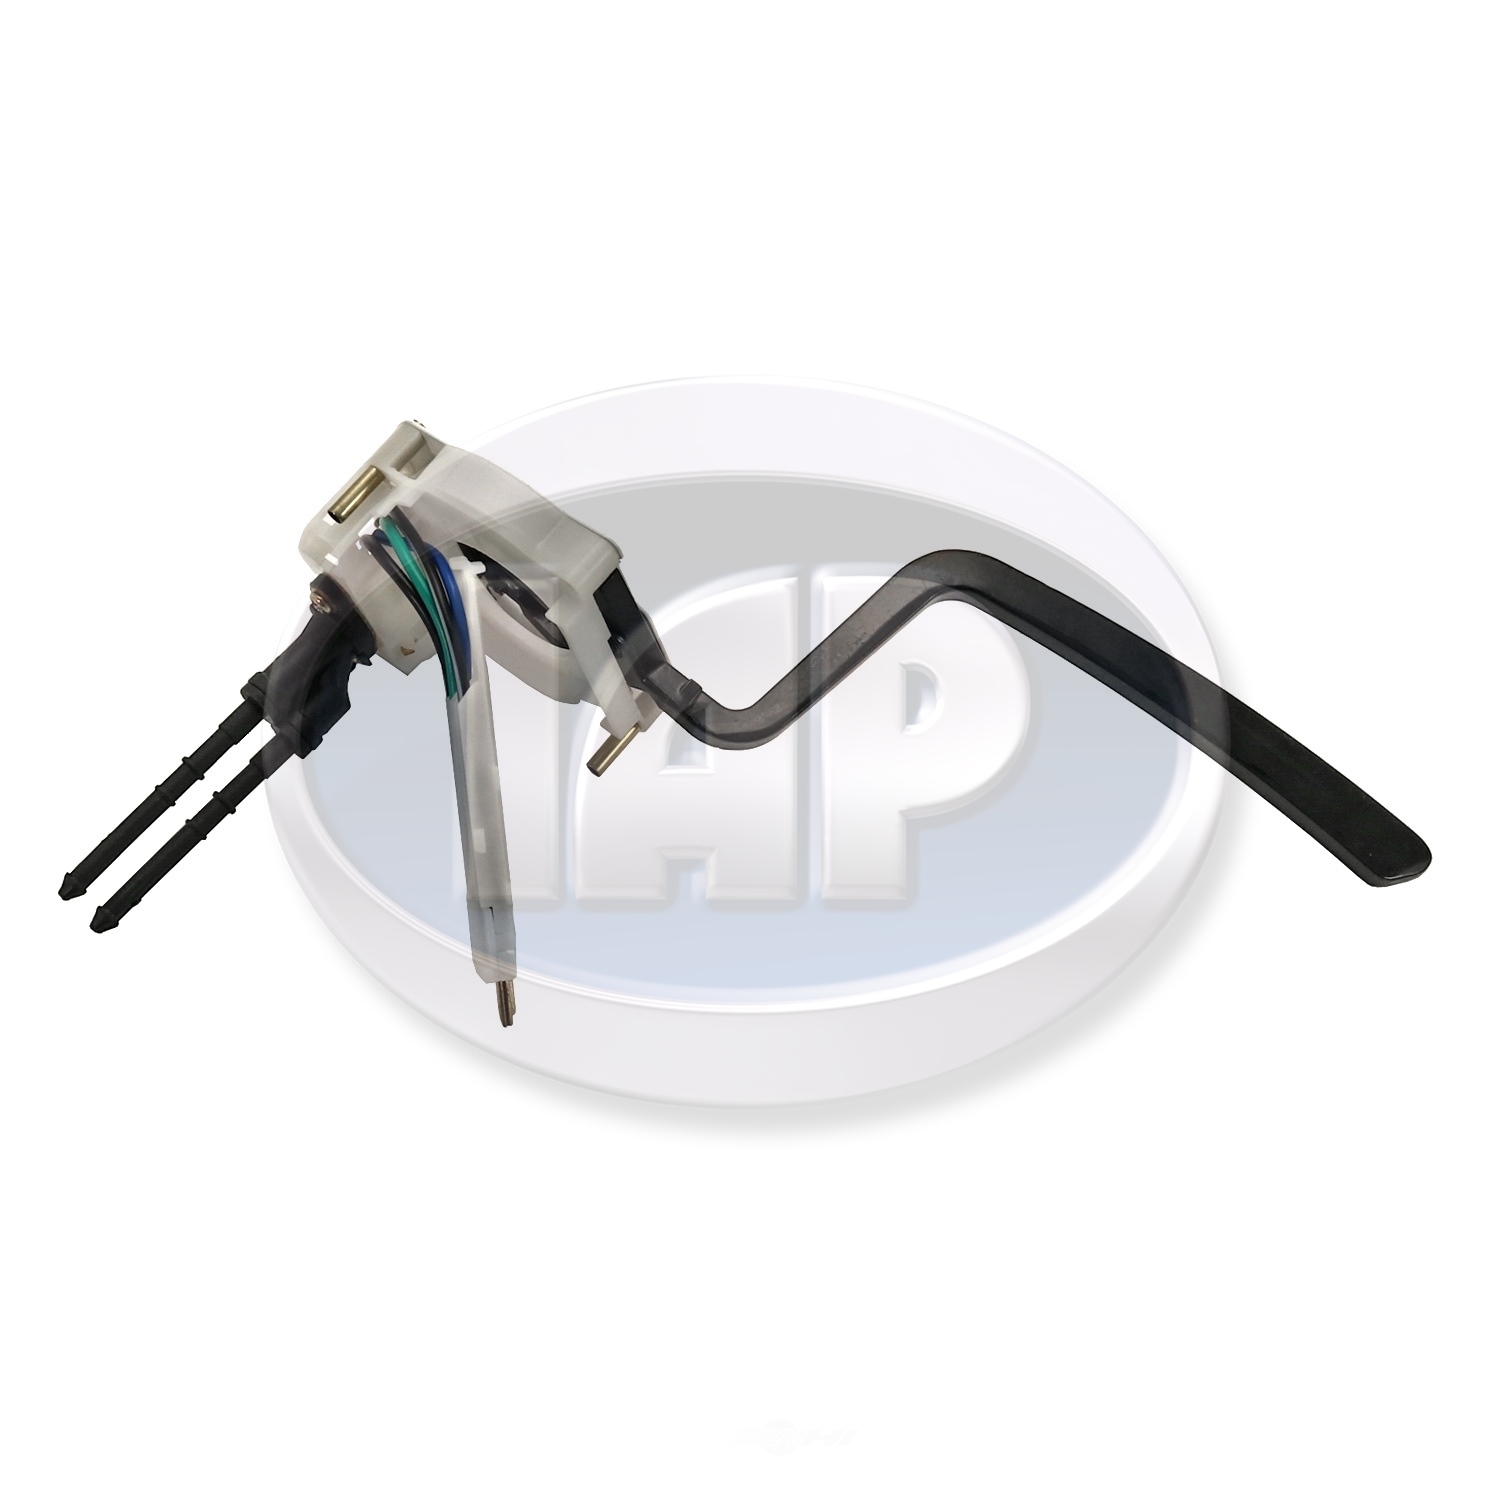 IAP/KUHLTEK MOTORWERKS - Windshield Wiper and Washer Switch - KMS 111953519H